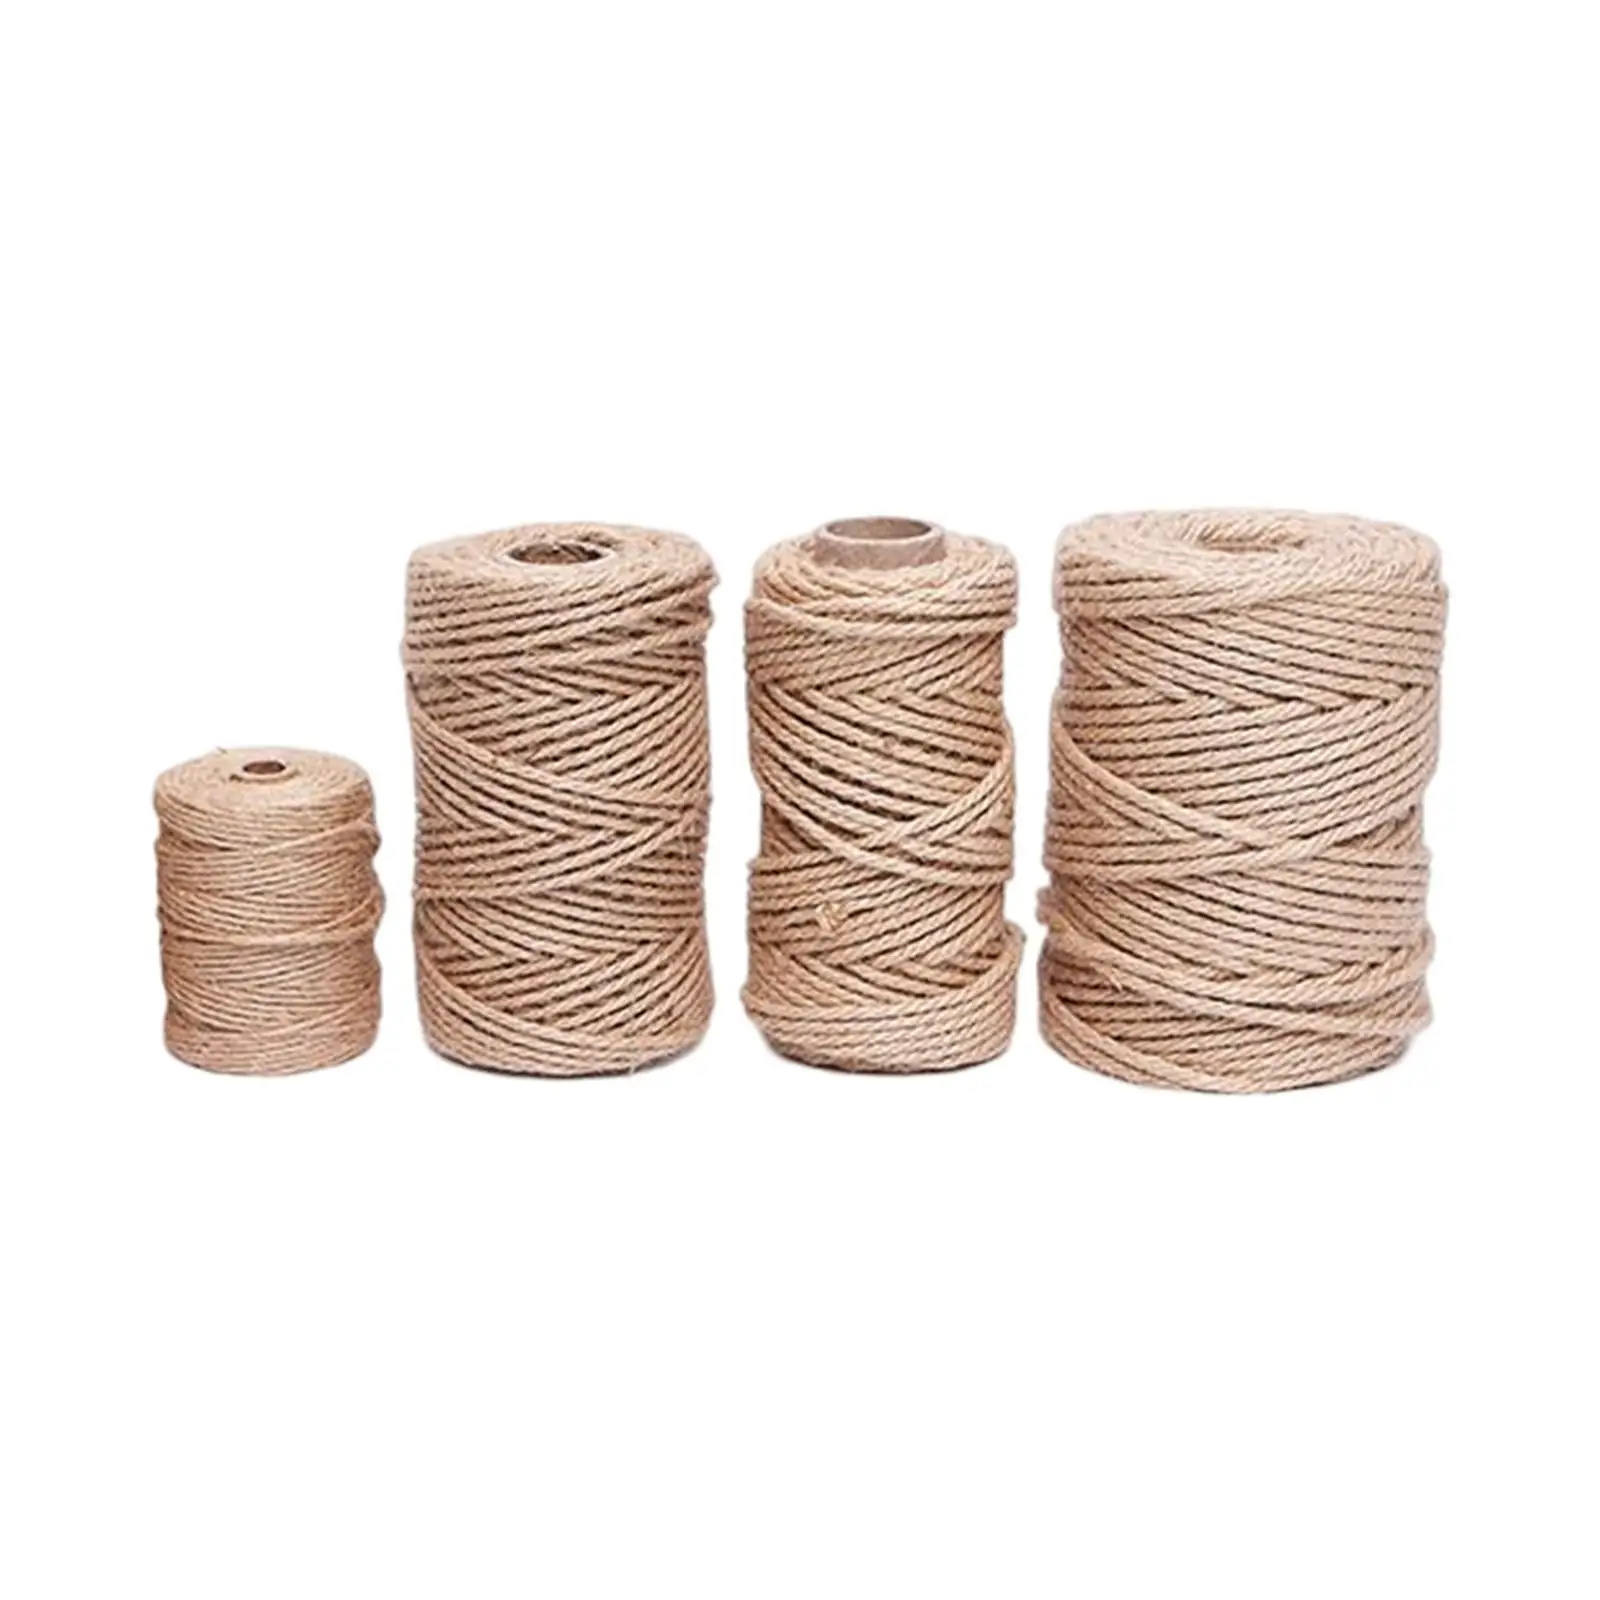 Jute Twine Rope Hemp Cord Handcraft String Sisal Ropes for Cat Pet Scratching Wedding Gift Packing Cat Sharpen Claw DIY Projects